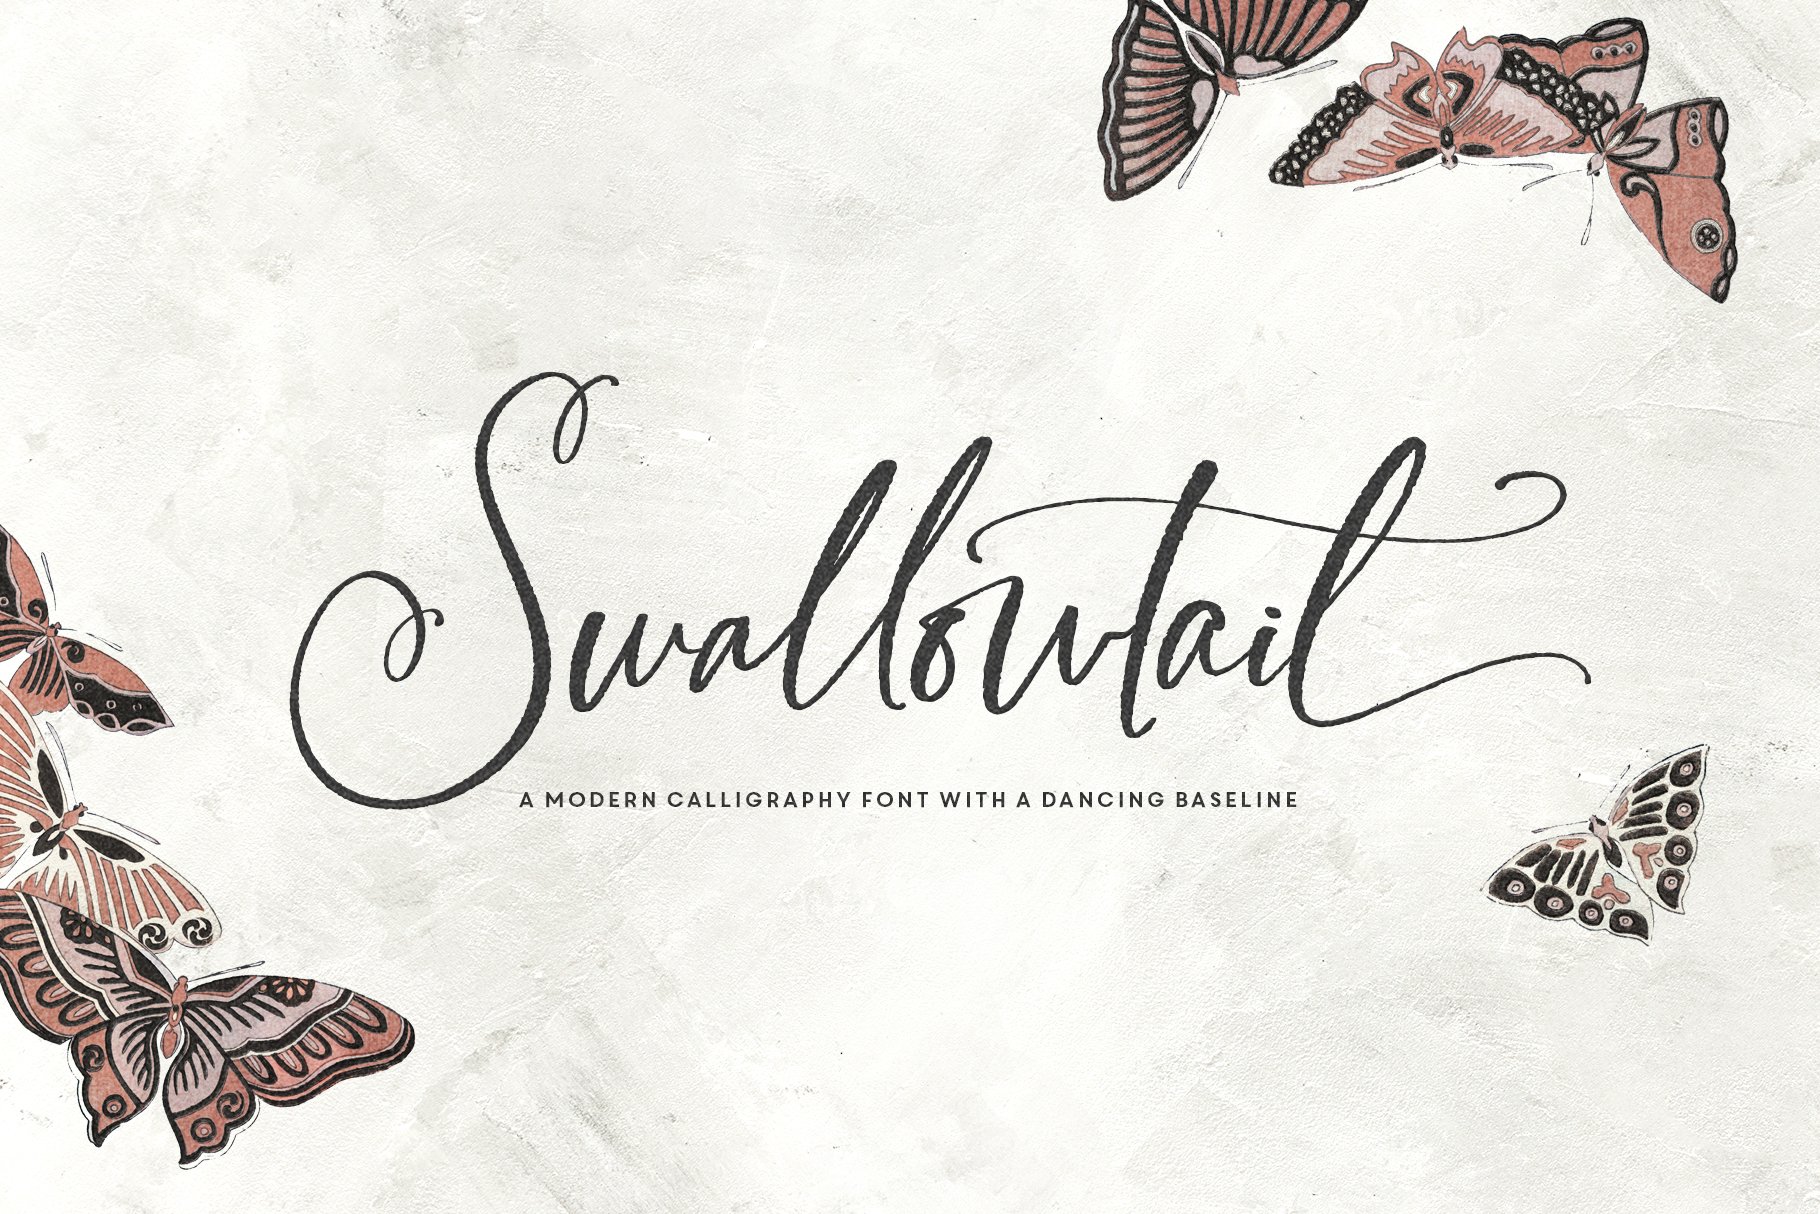 Swallowtail Modern Calligraphy cover image.